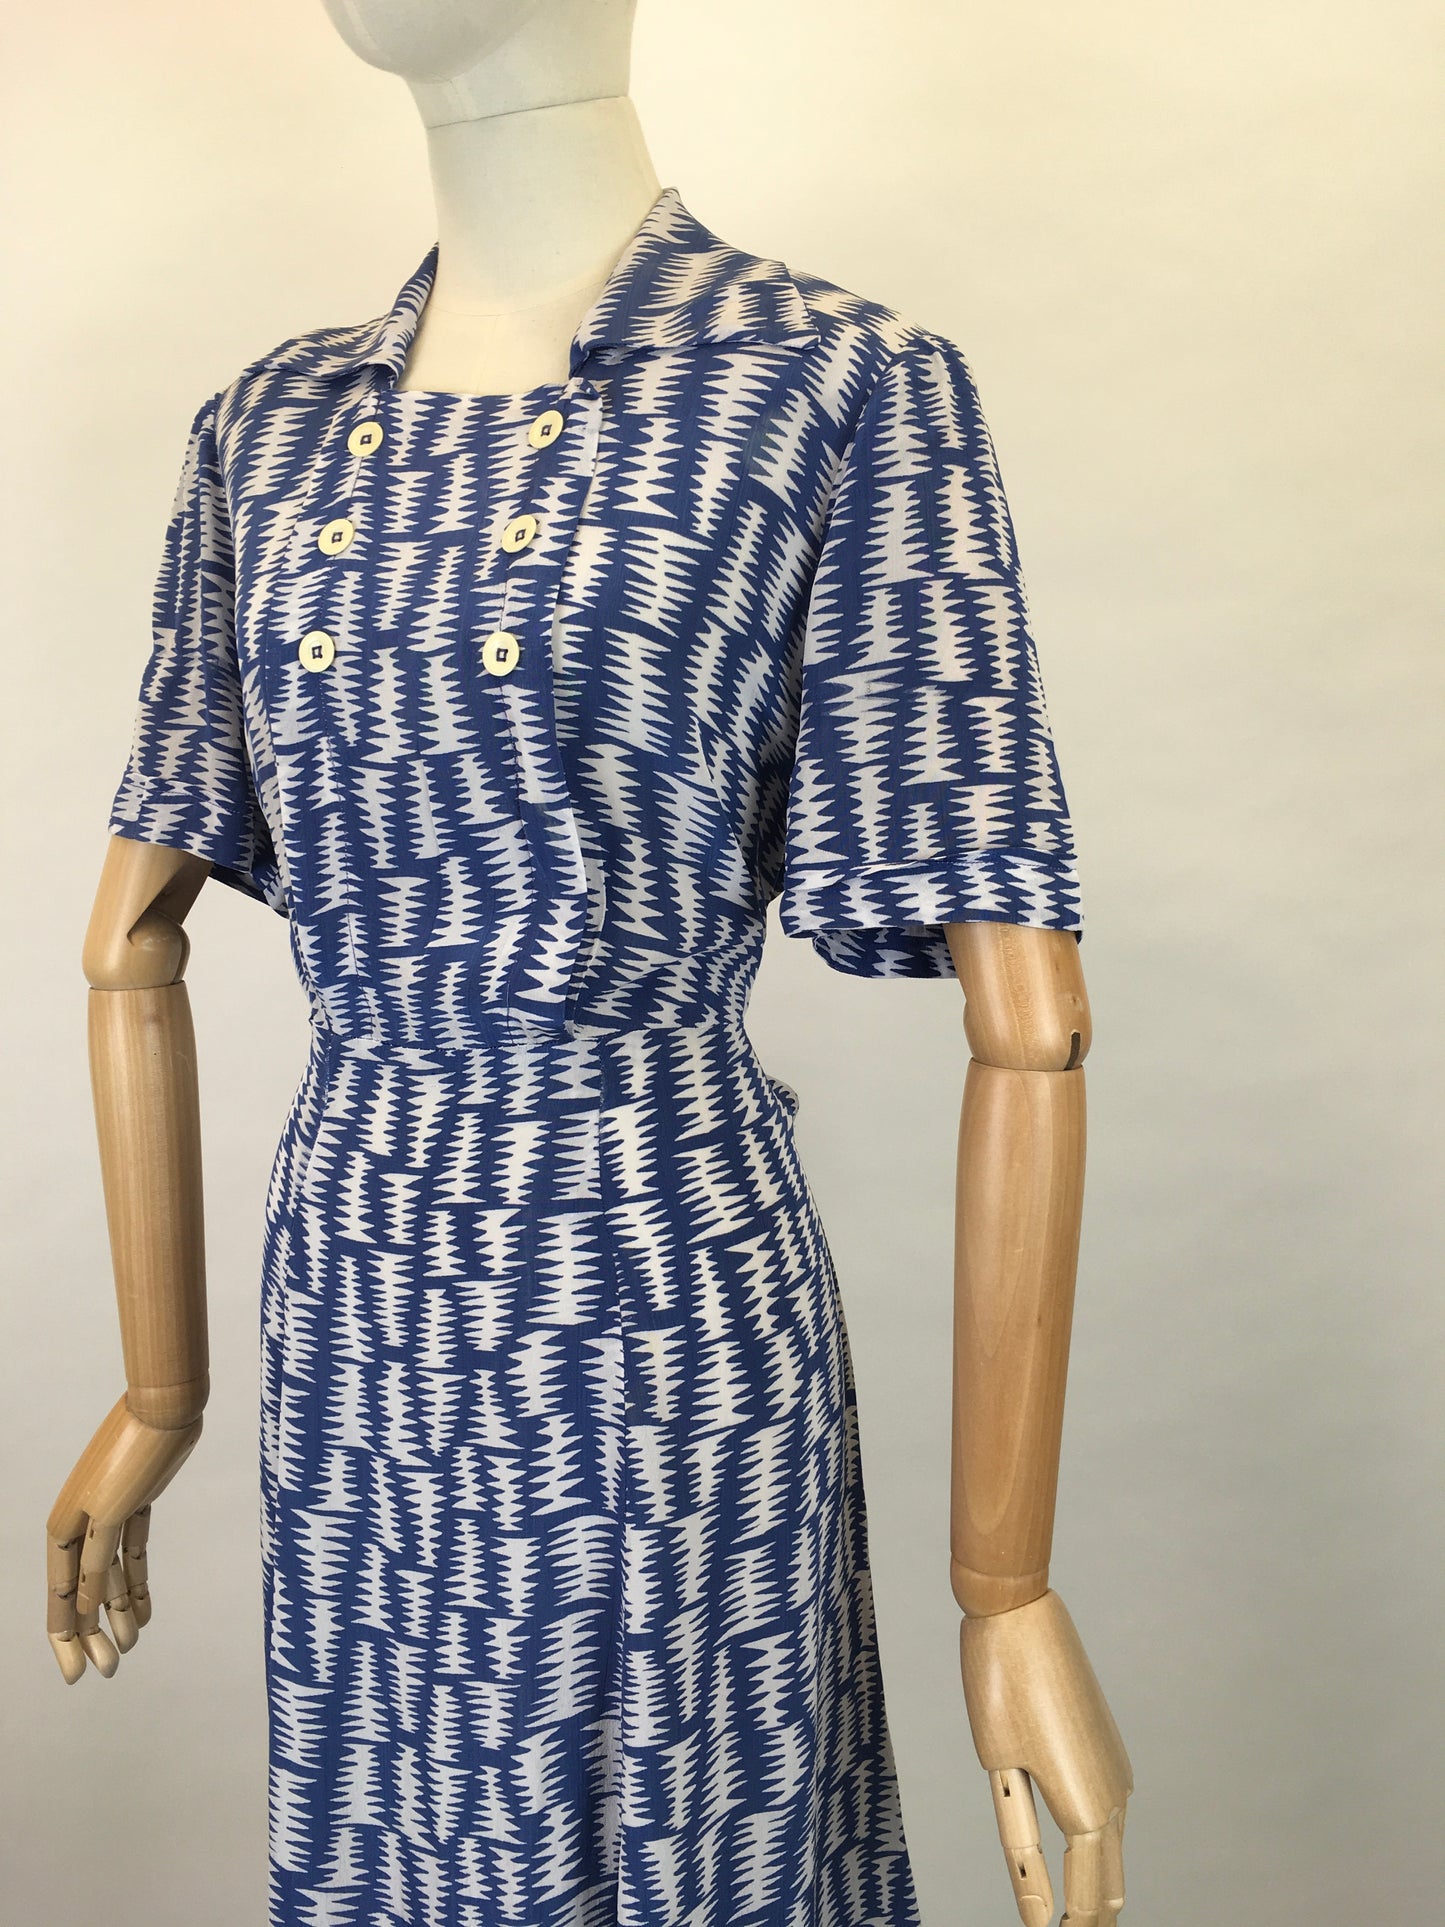 Original 1940s Blue & White Day Dress - Made From a Beautiful Fine Sheer Crepe